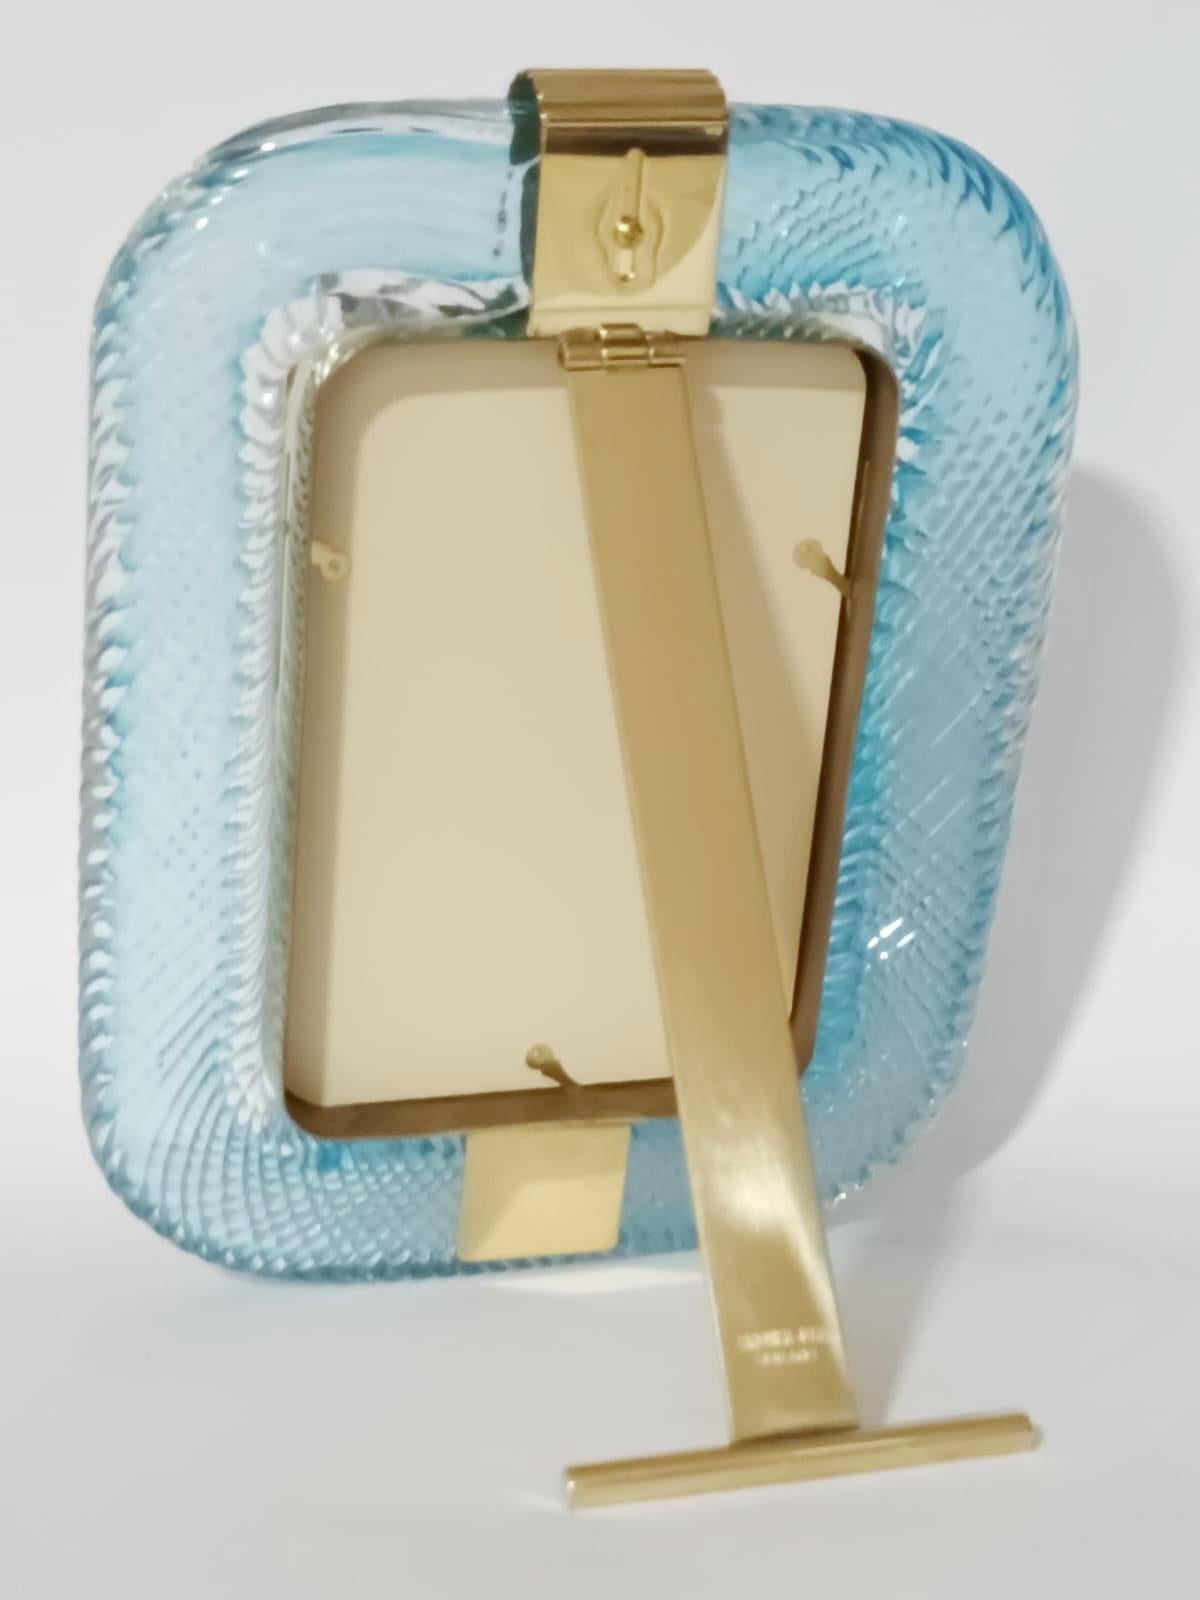 Murano Light Blue Photo Frame by Barovier e Toso In Good Condition For Sale In Los Angeles, CA